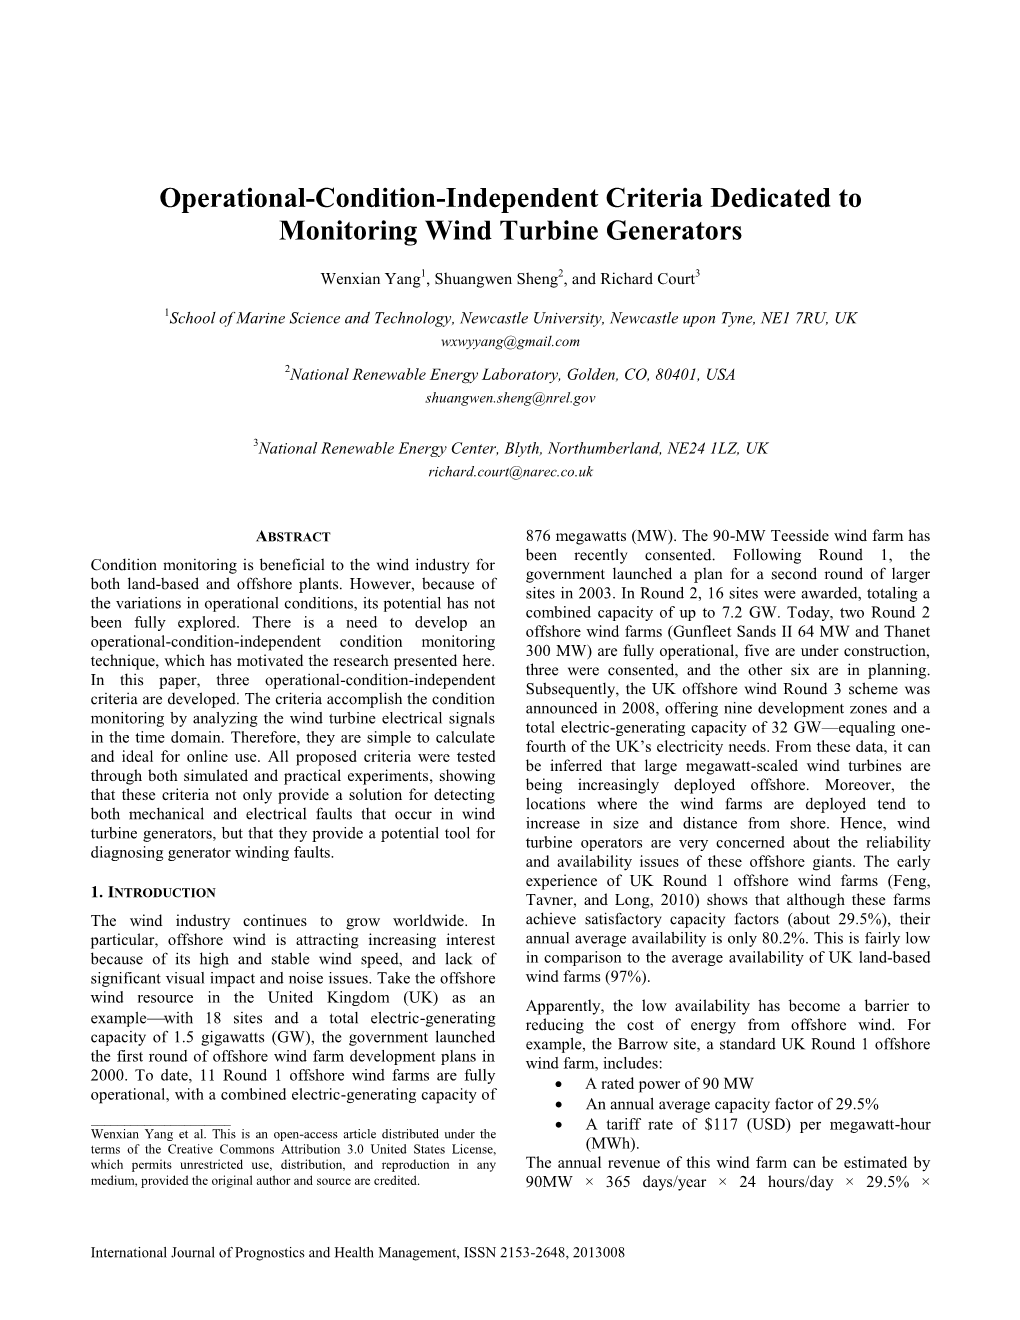 Operational-Condition-Independent Criteria Dedicated to Monitoring Wind Turbine Generators